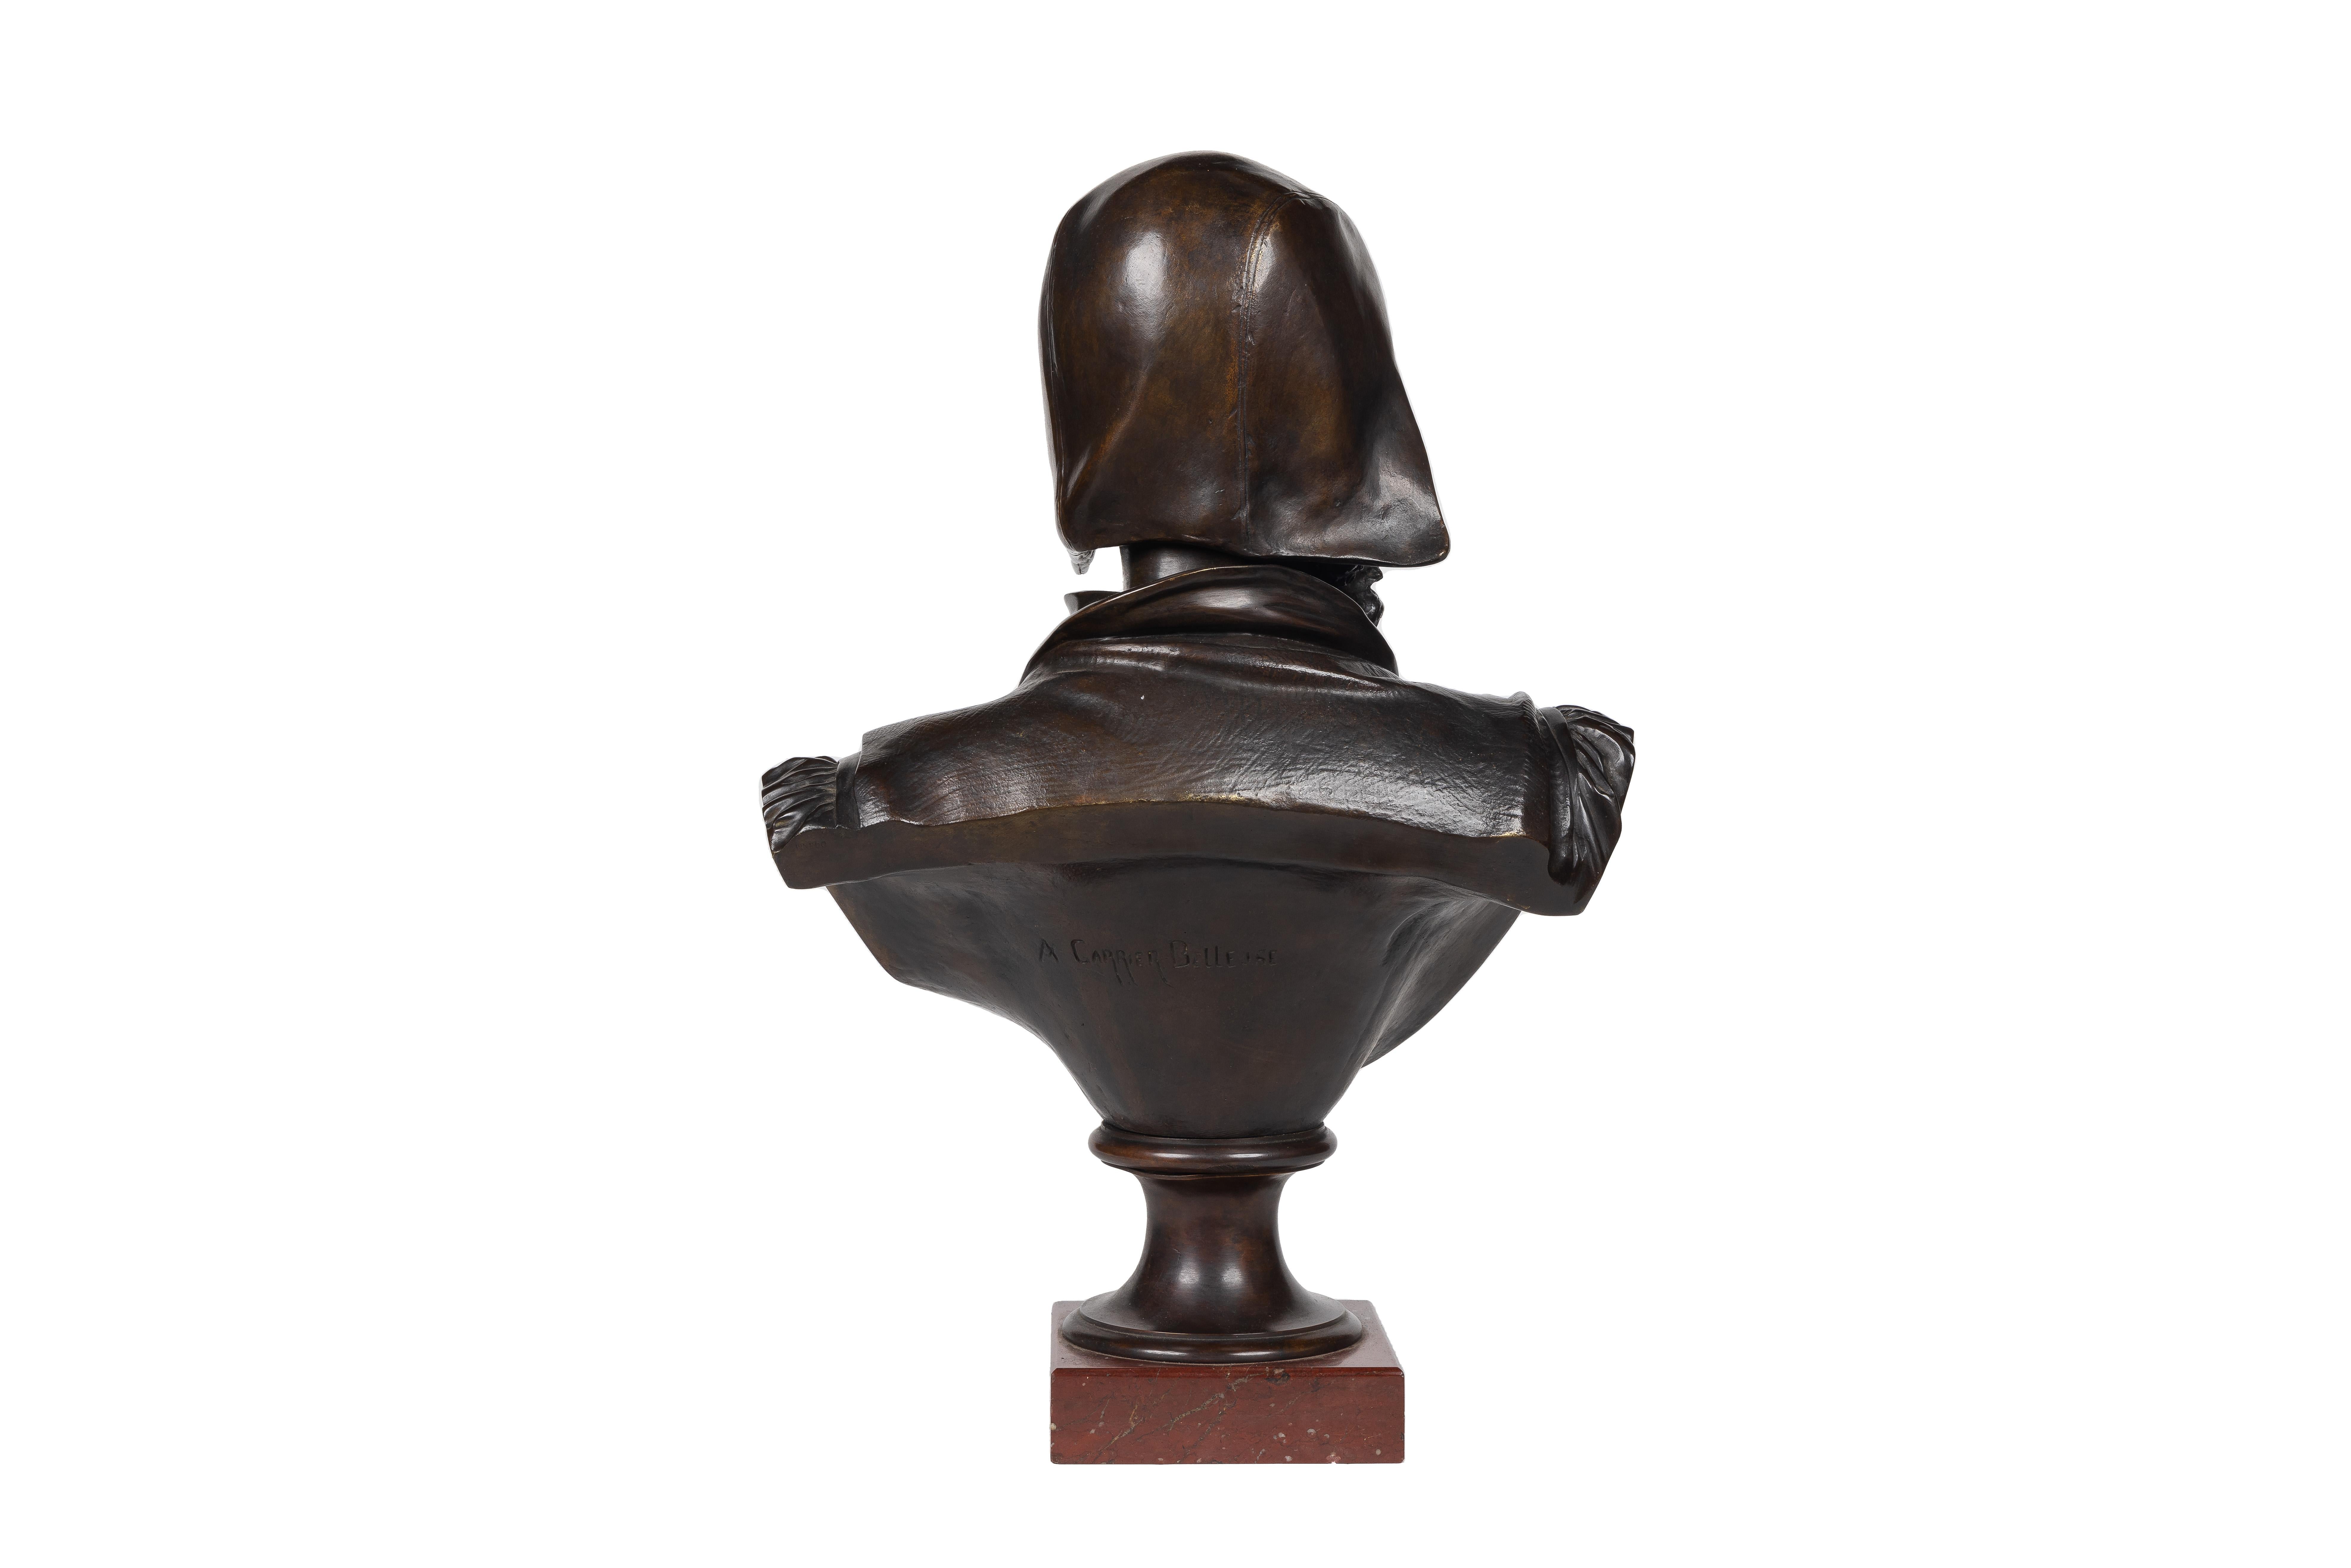 French Albert-Ernest Carrier-Belleuse, A Rare and Important Bronze Bust of Michelangelo For Sale